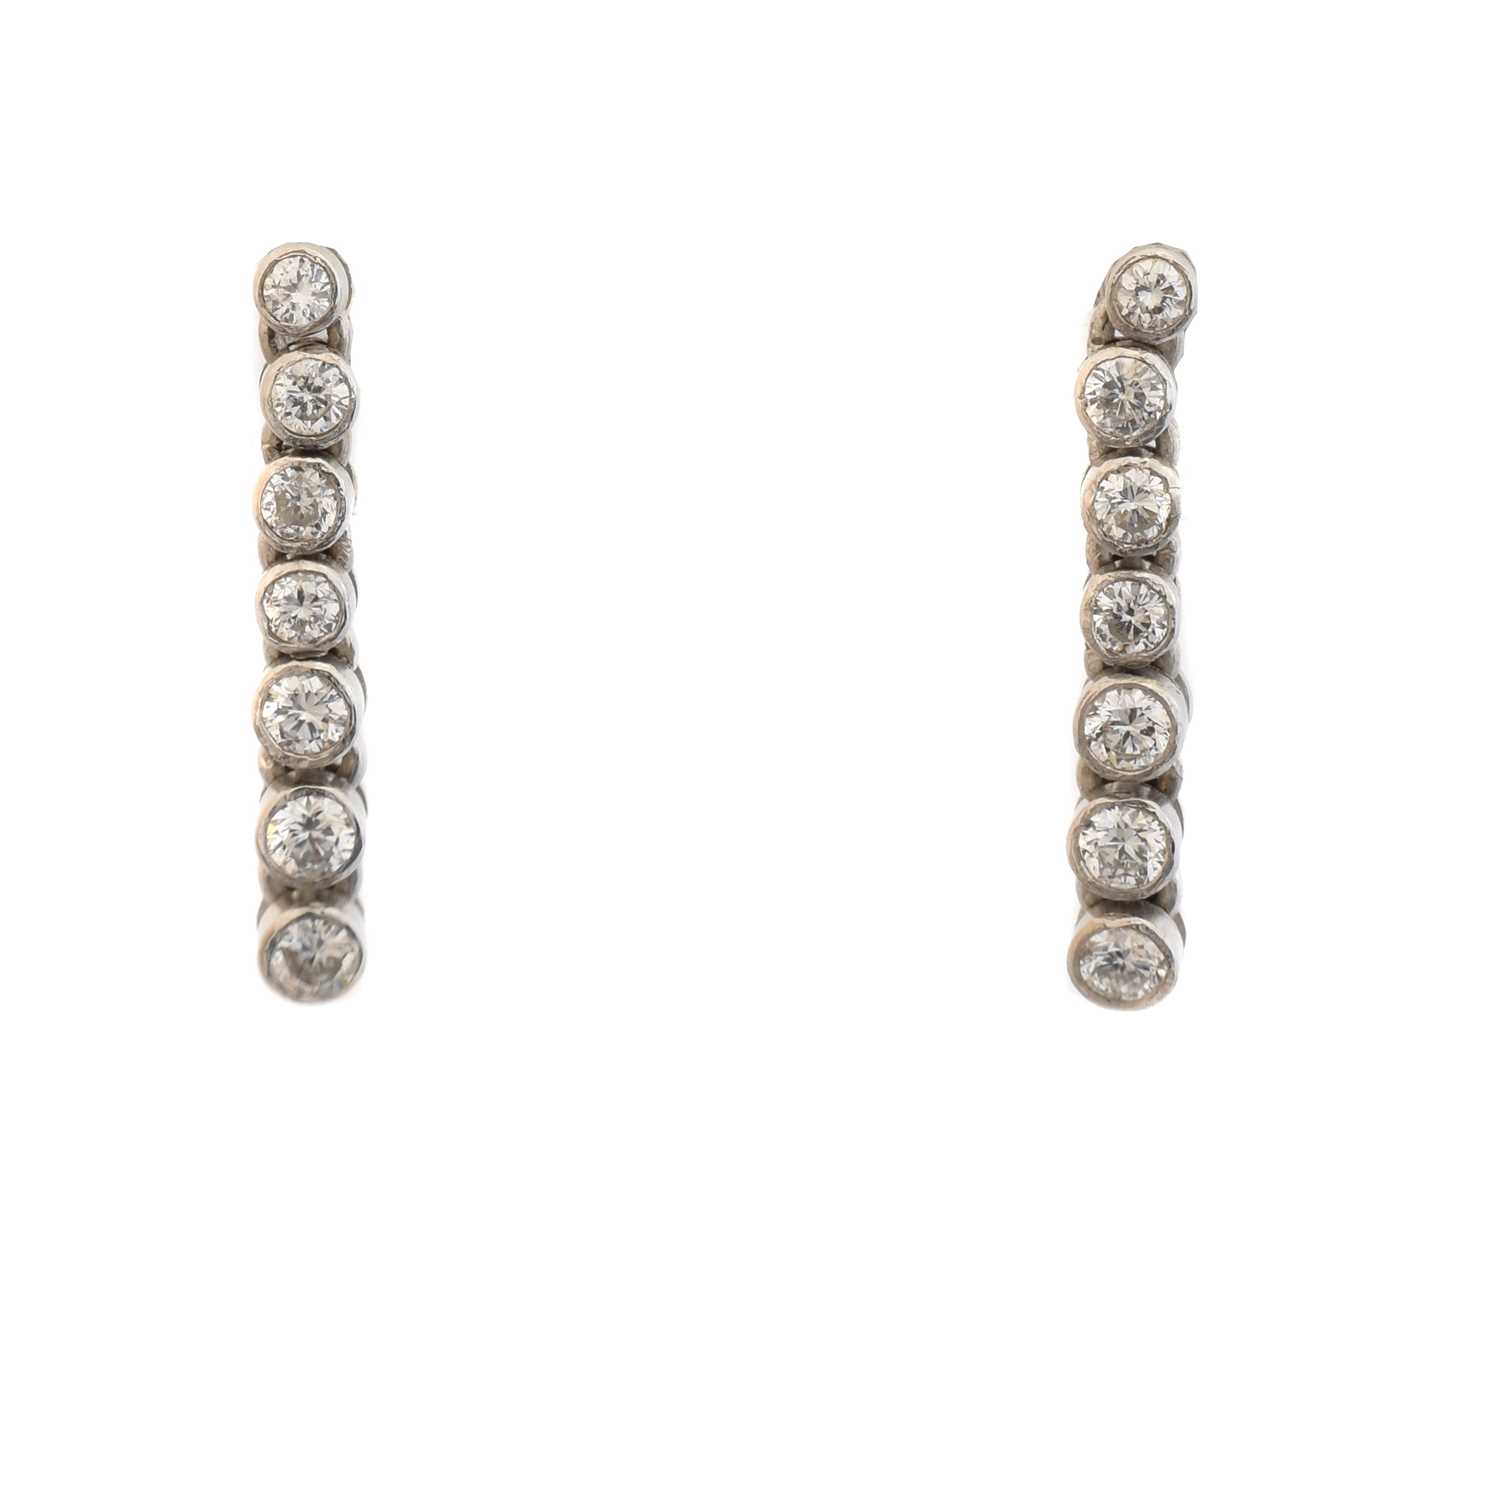 Lot 35 - A pair of 18ct gold diamond earrings